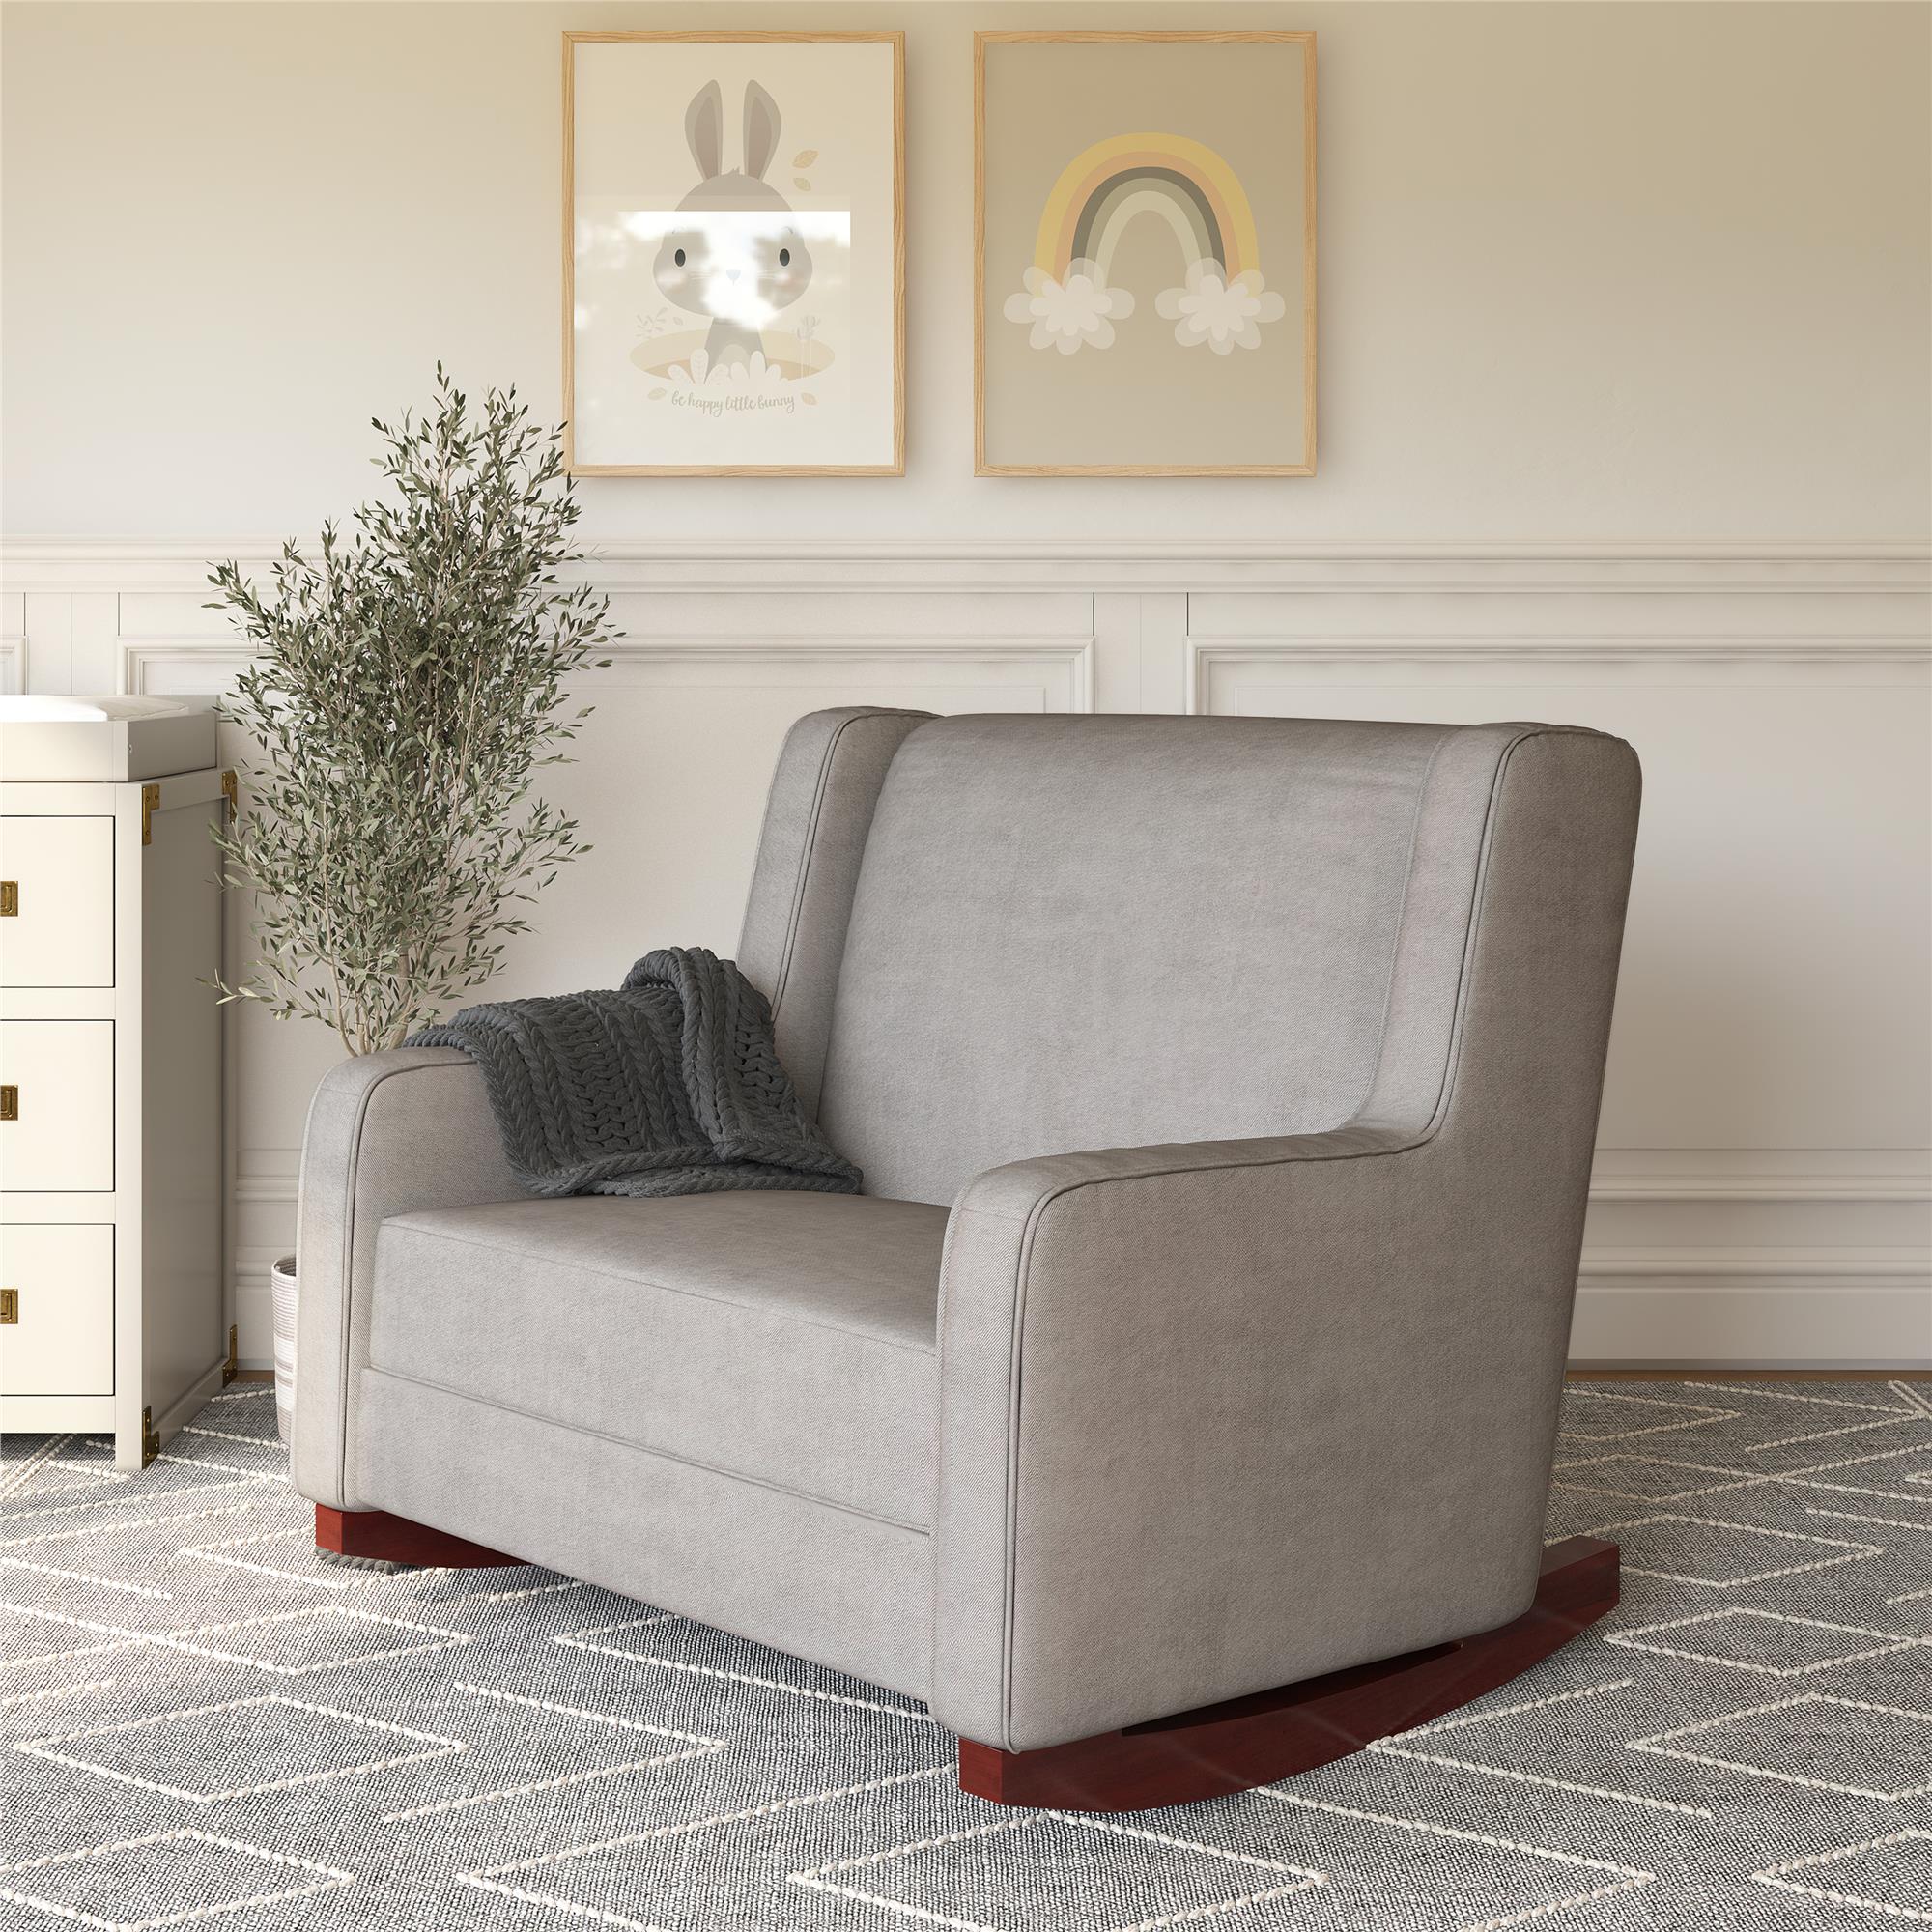 Baby Relax Hadley Upholstered Double Rocker Chair, Taupe Microfiber - image 4 of 15